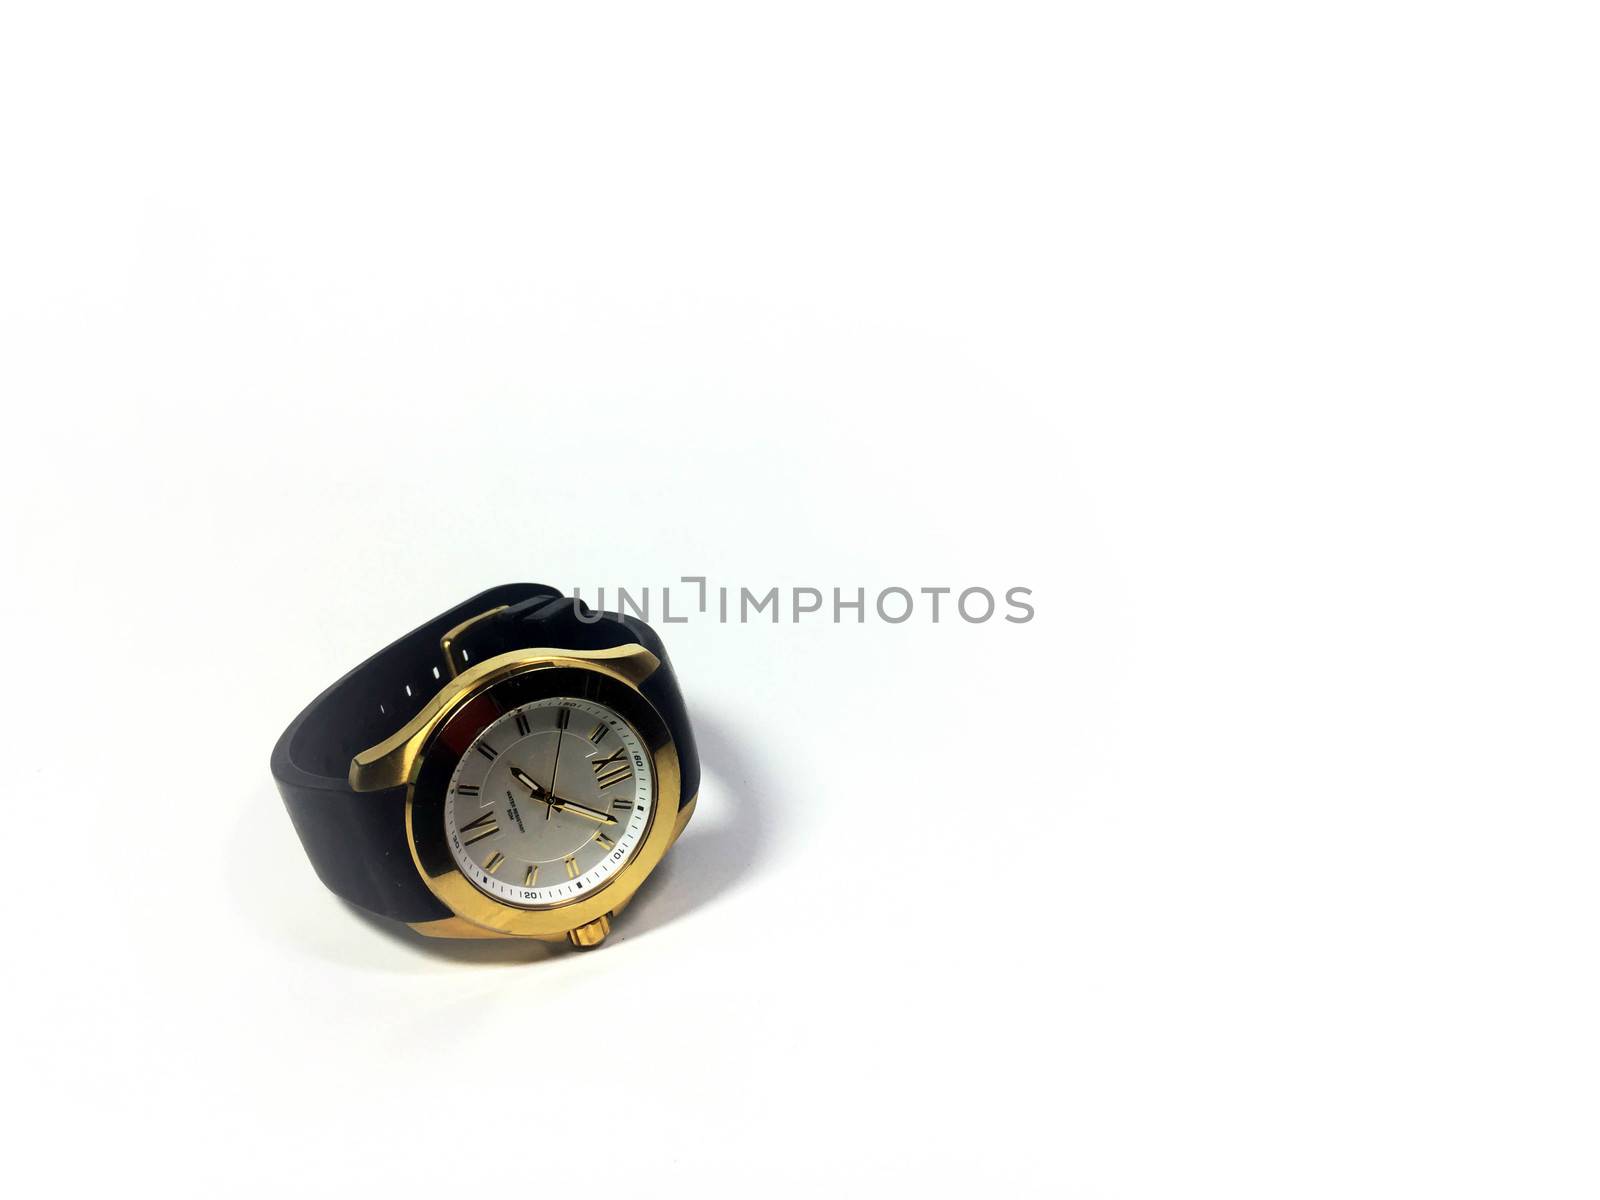 the watch clock Roman numerals, gold housings, black straps isolated on white